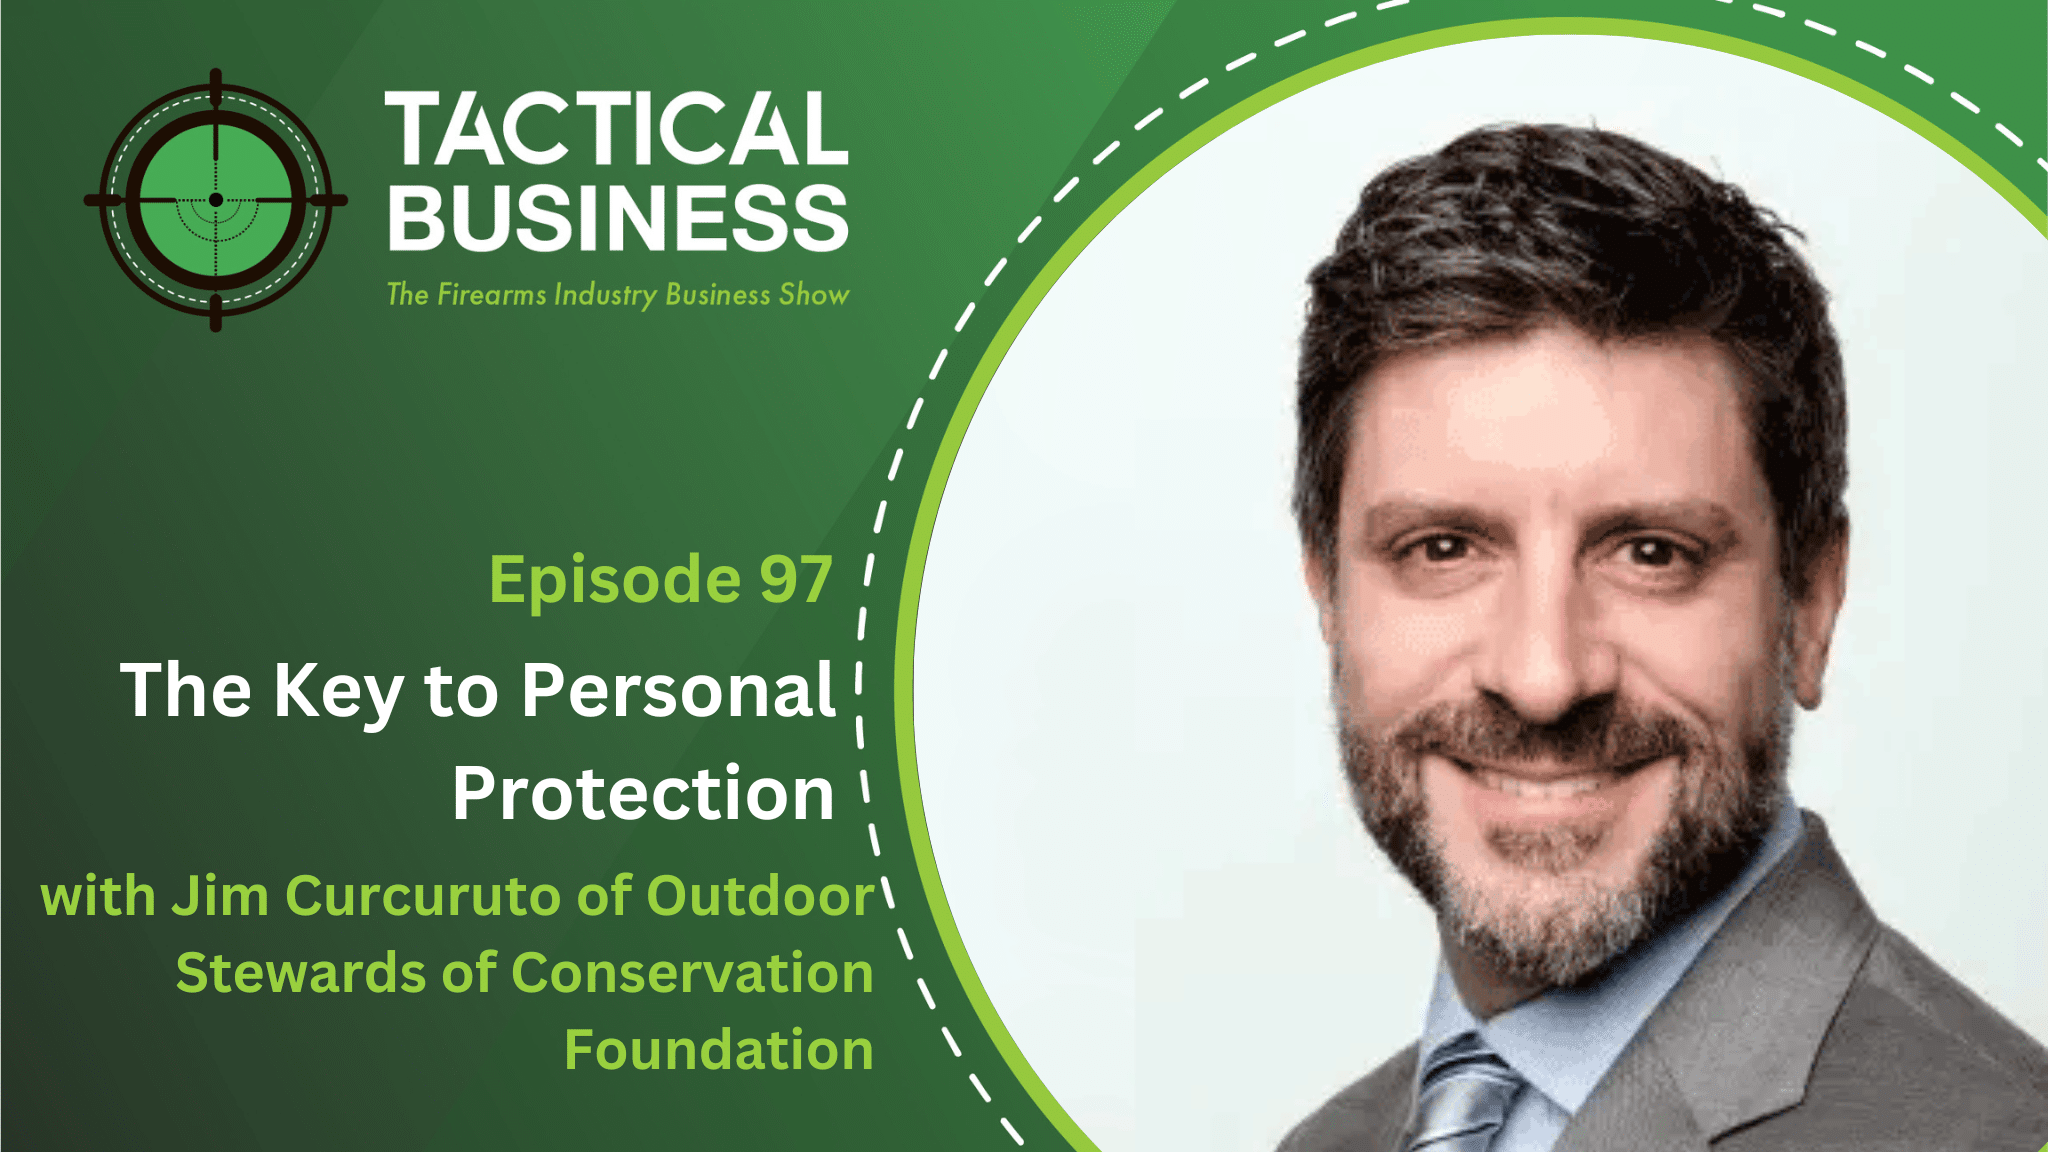 The Key to Personal Protection with Jim Curcuruto of Outdoor Stewards of Conservation Foundation